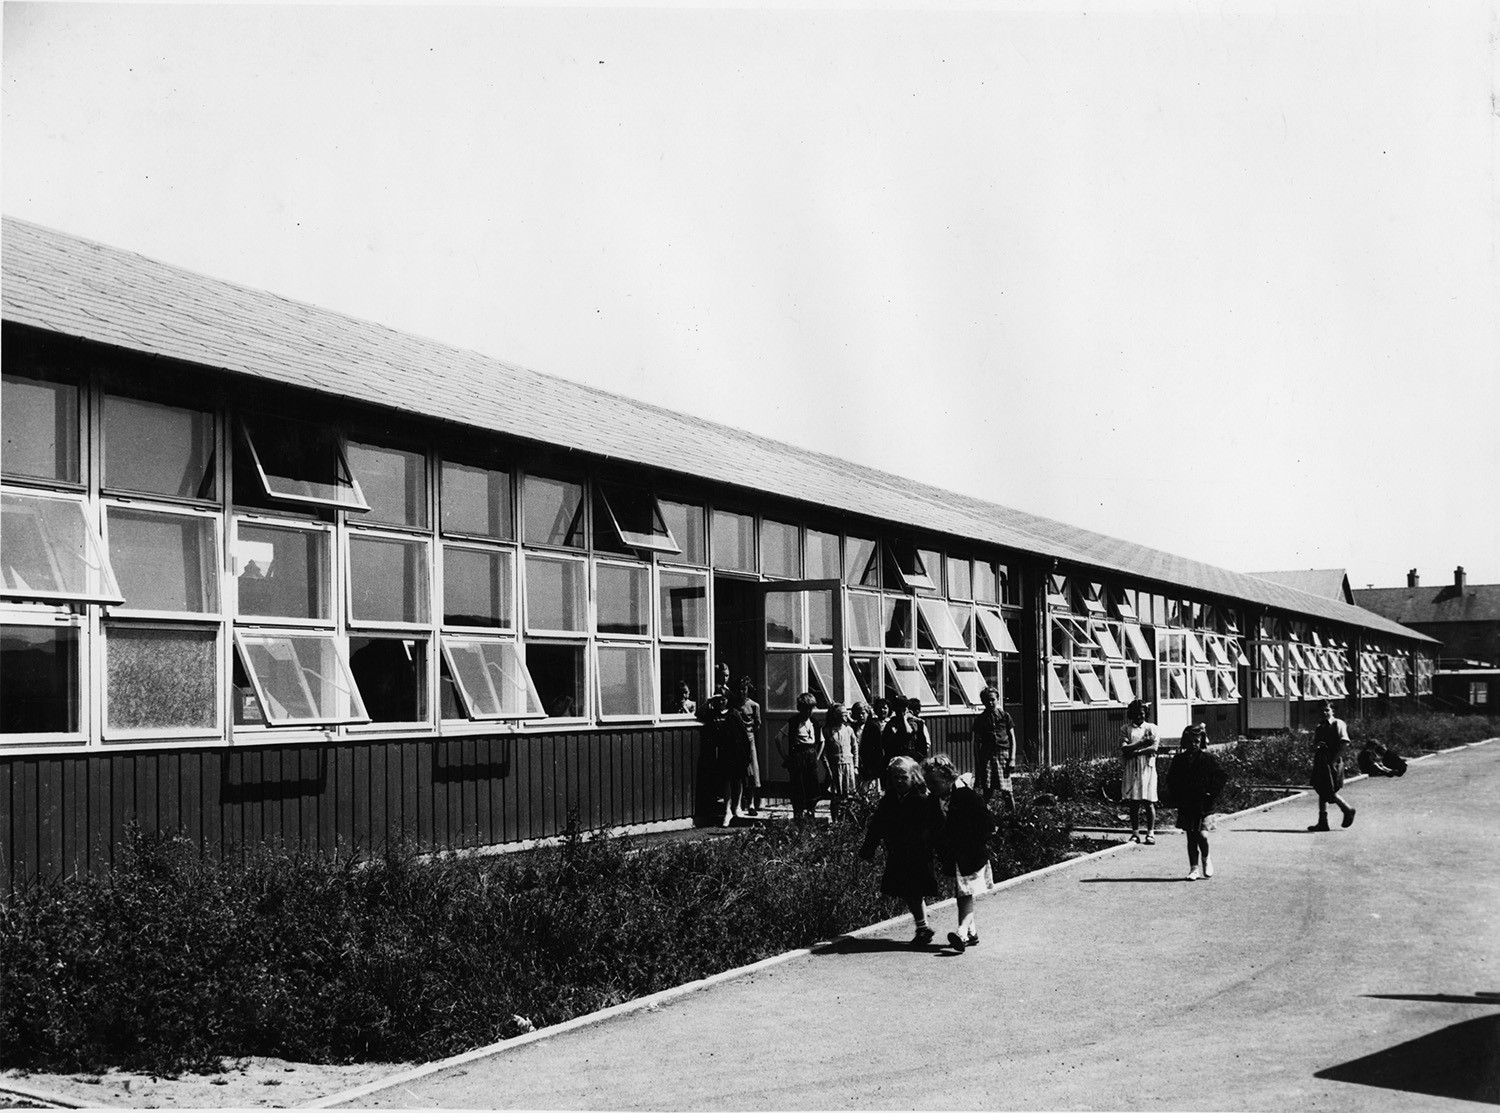 An old black and white photo of a Puutalo wooden school. The school's wall has many windows right next to each other and some of them are open.